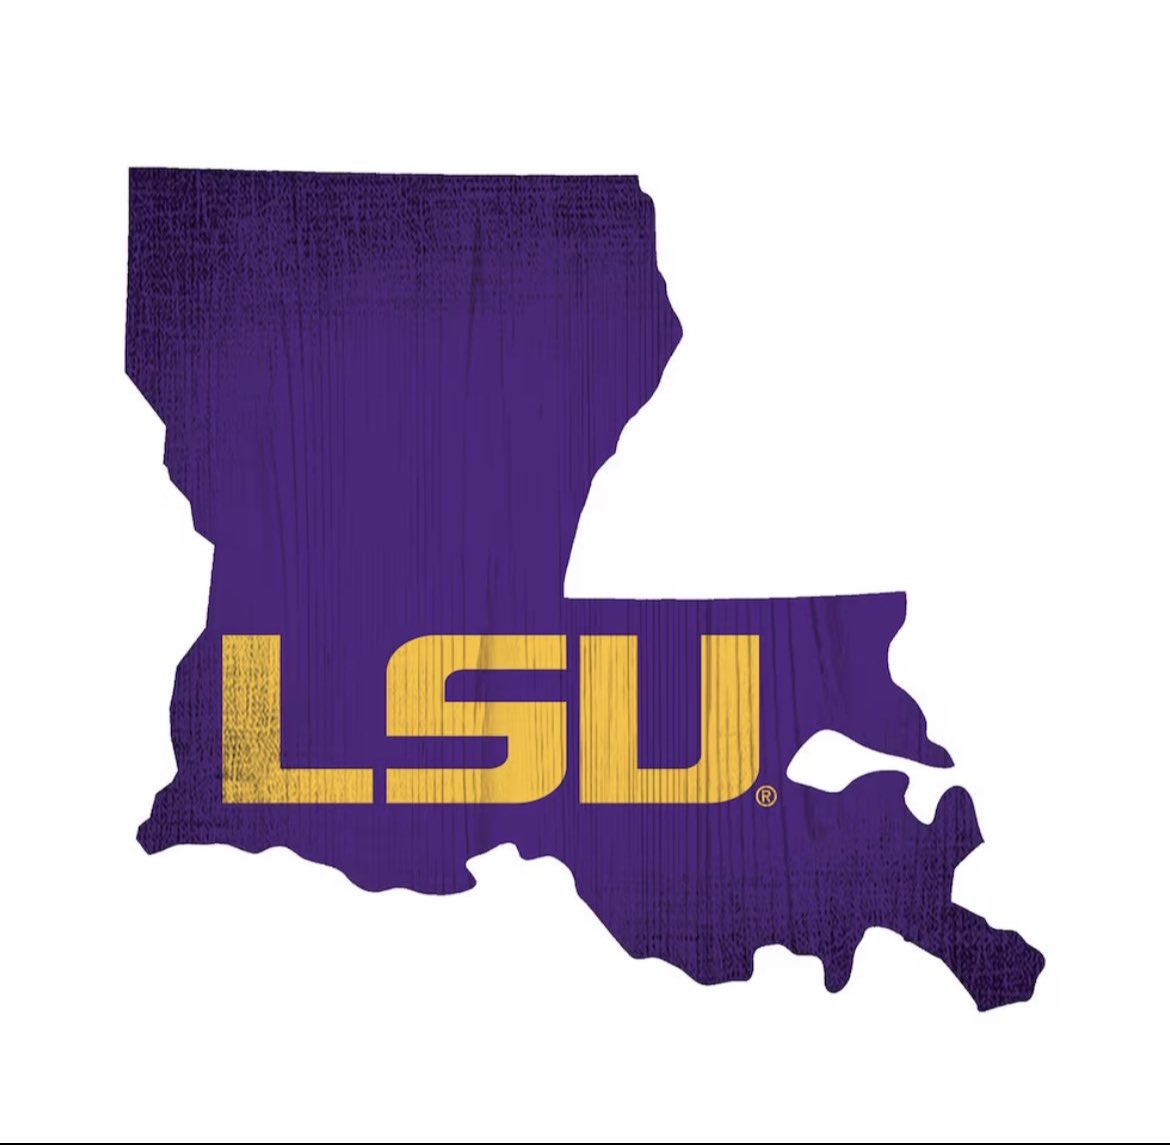 I will be at LSU this weekend for a game day visit📍 @SteepDiesel @CoachEHicks @GrantBonnette @grayson_fb @CoachSB_4theG @CoachGCarswell @BigCoachMarvin @CoachStokowski @coach_them_up1 @TrellJones203 @najehwilk